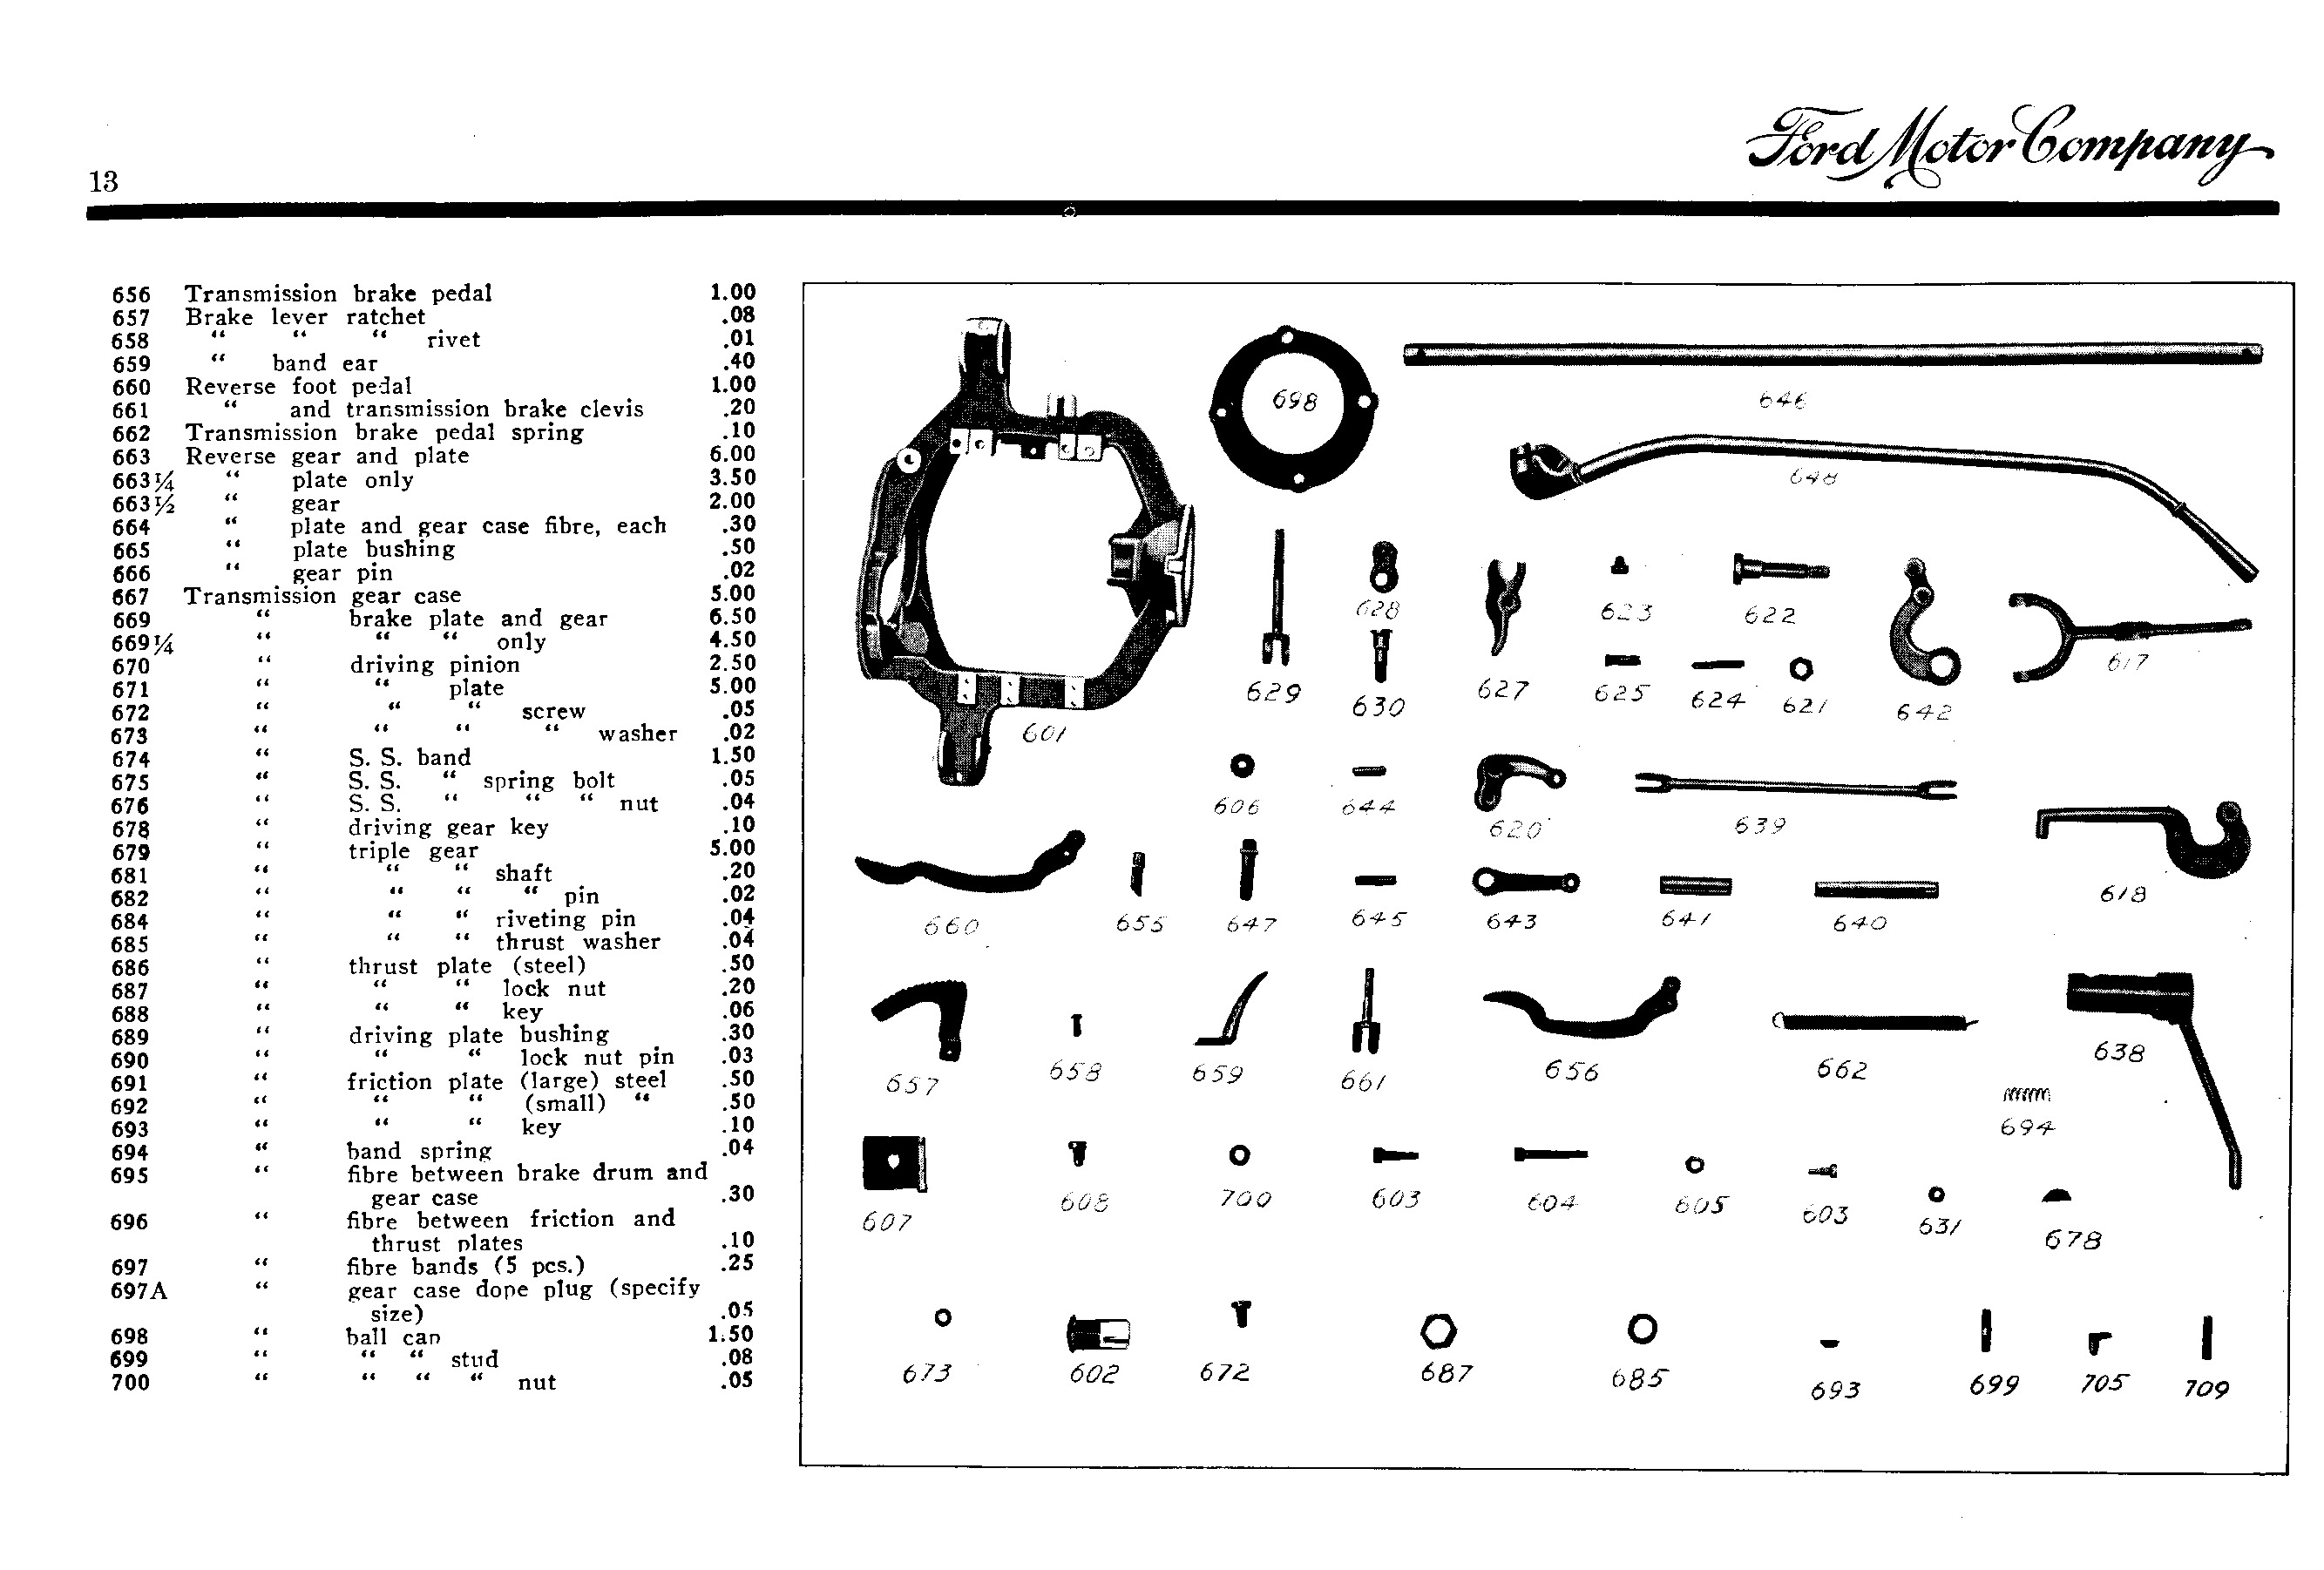 1907_Ford_Roadster_Parts_List-13